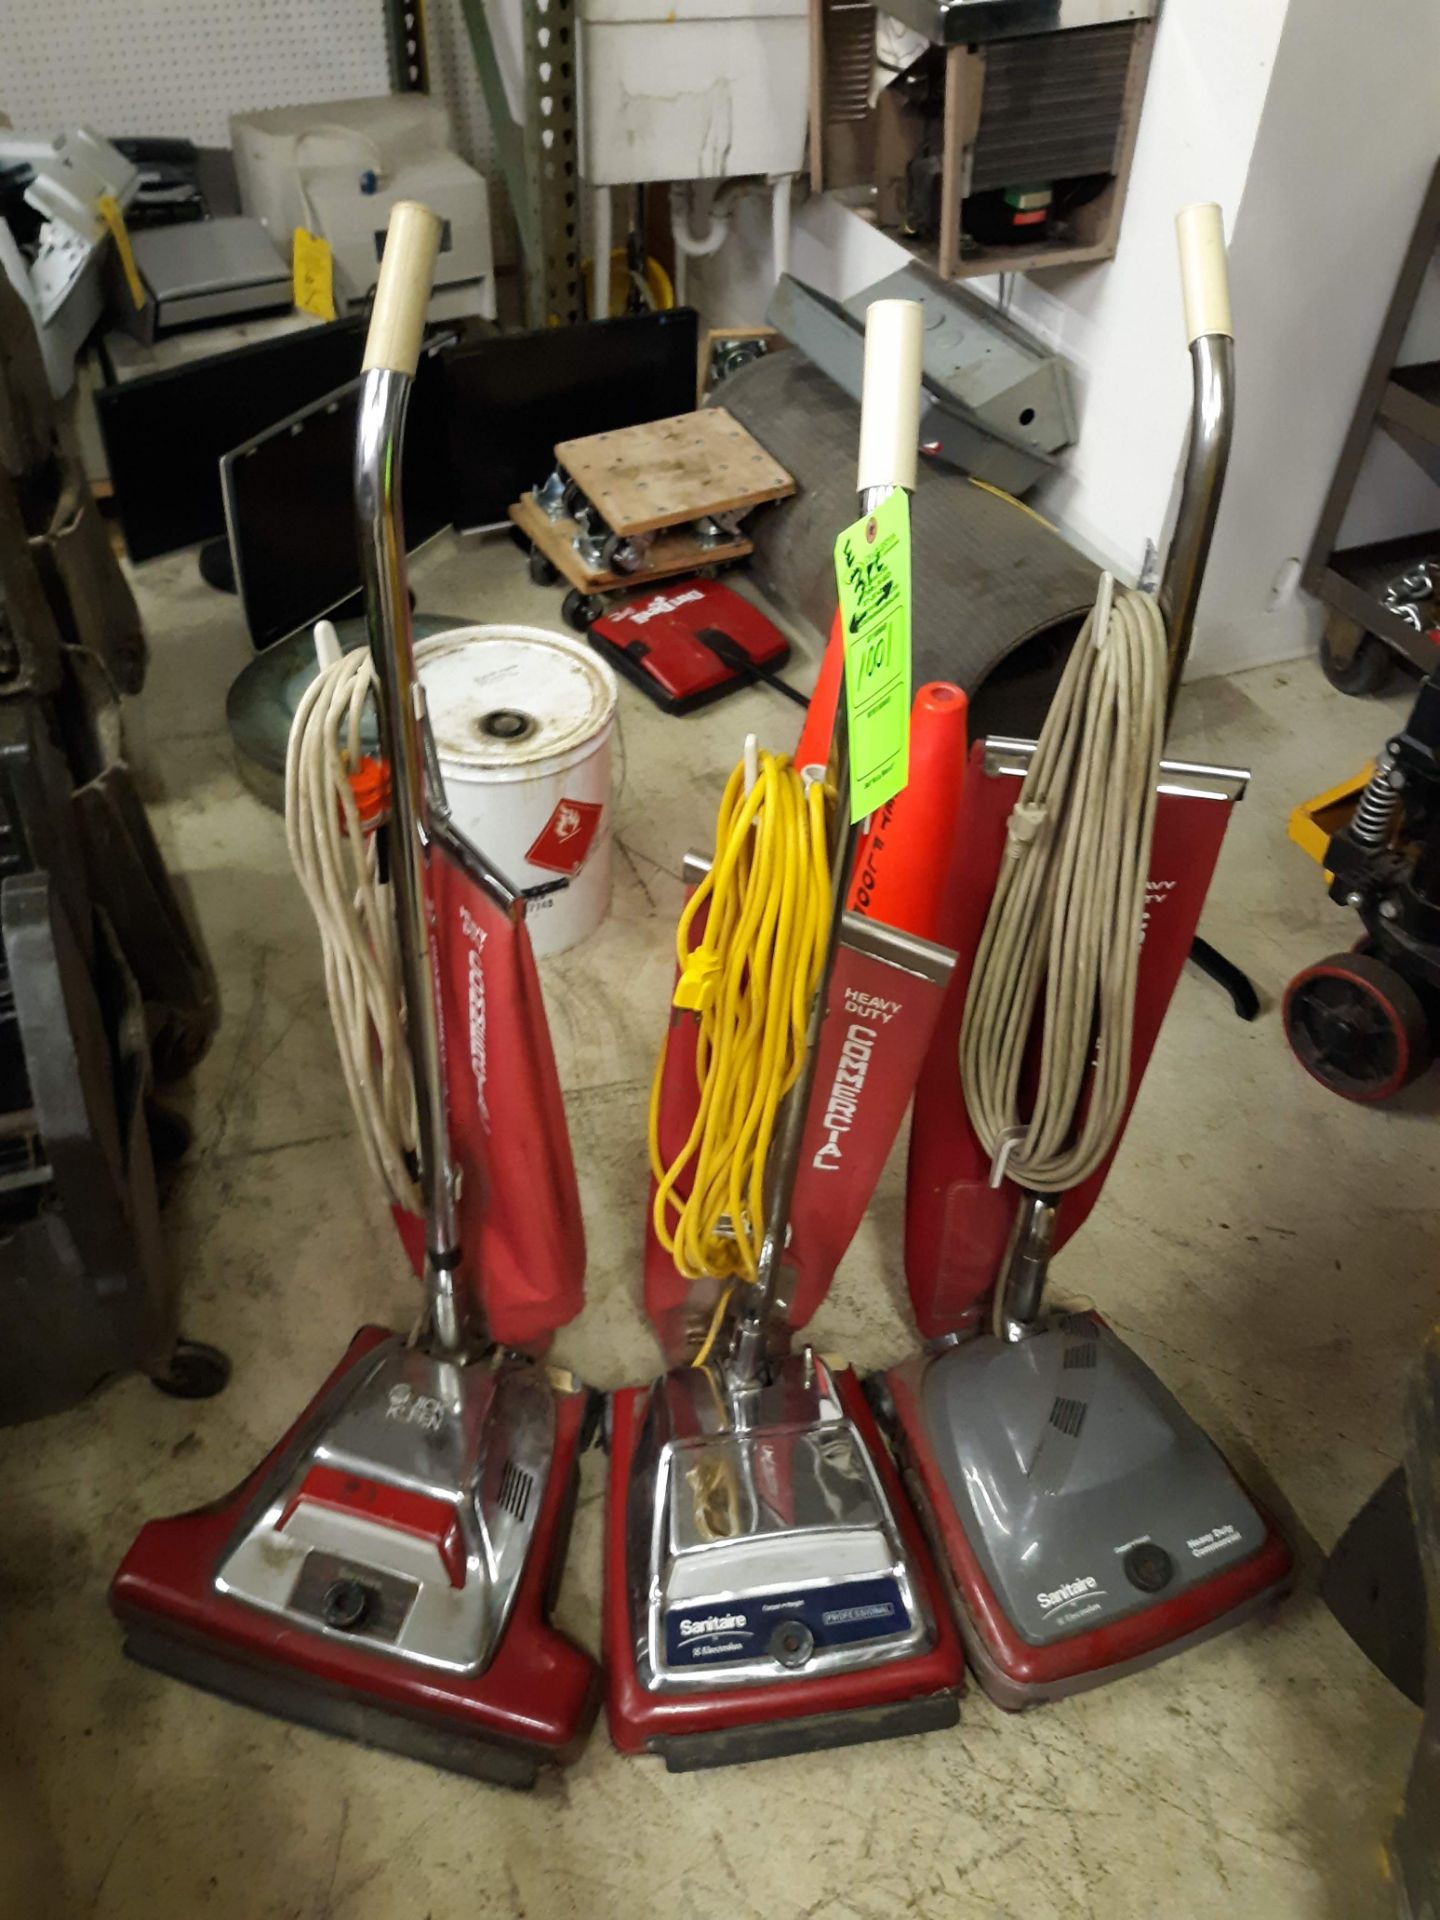 (3) SANITAIRE HEAVY DUTY COMMERCIAL VACUUM CLEANERS (LOCATED AT: 432 COUNCIL DRIVE, FORT WAYNE, IN